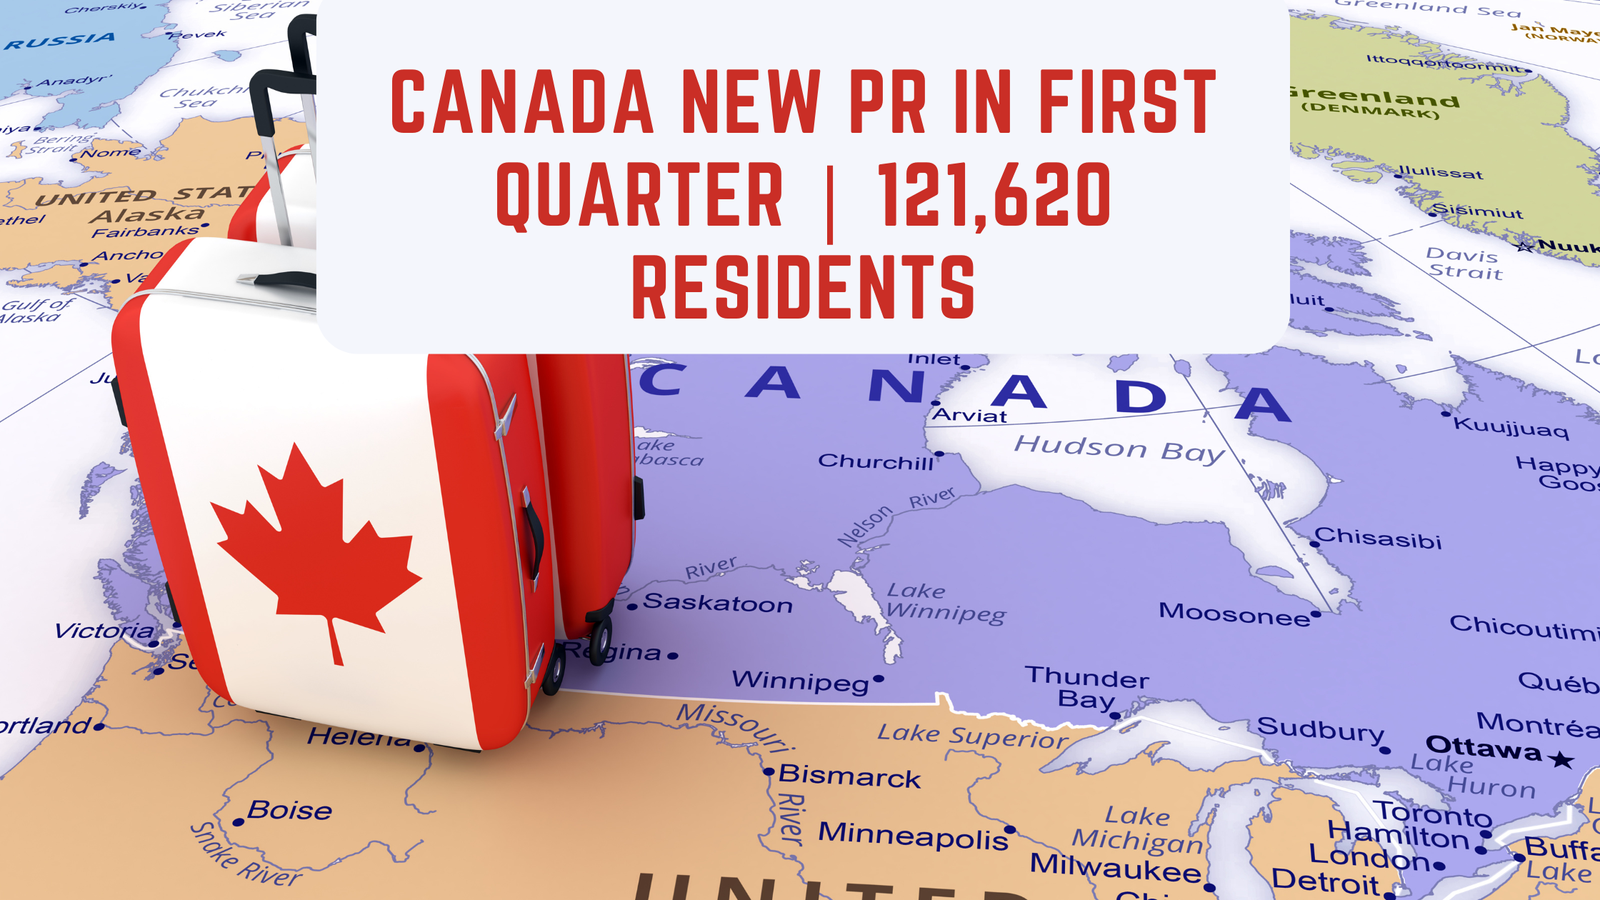 Canada New PR In First Quarter | 121,620 Residents